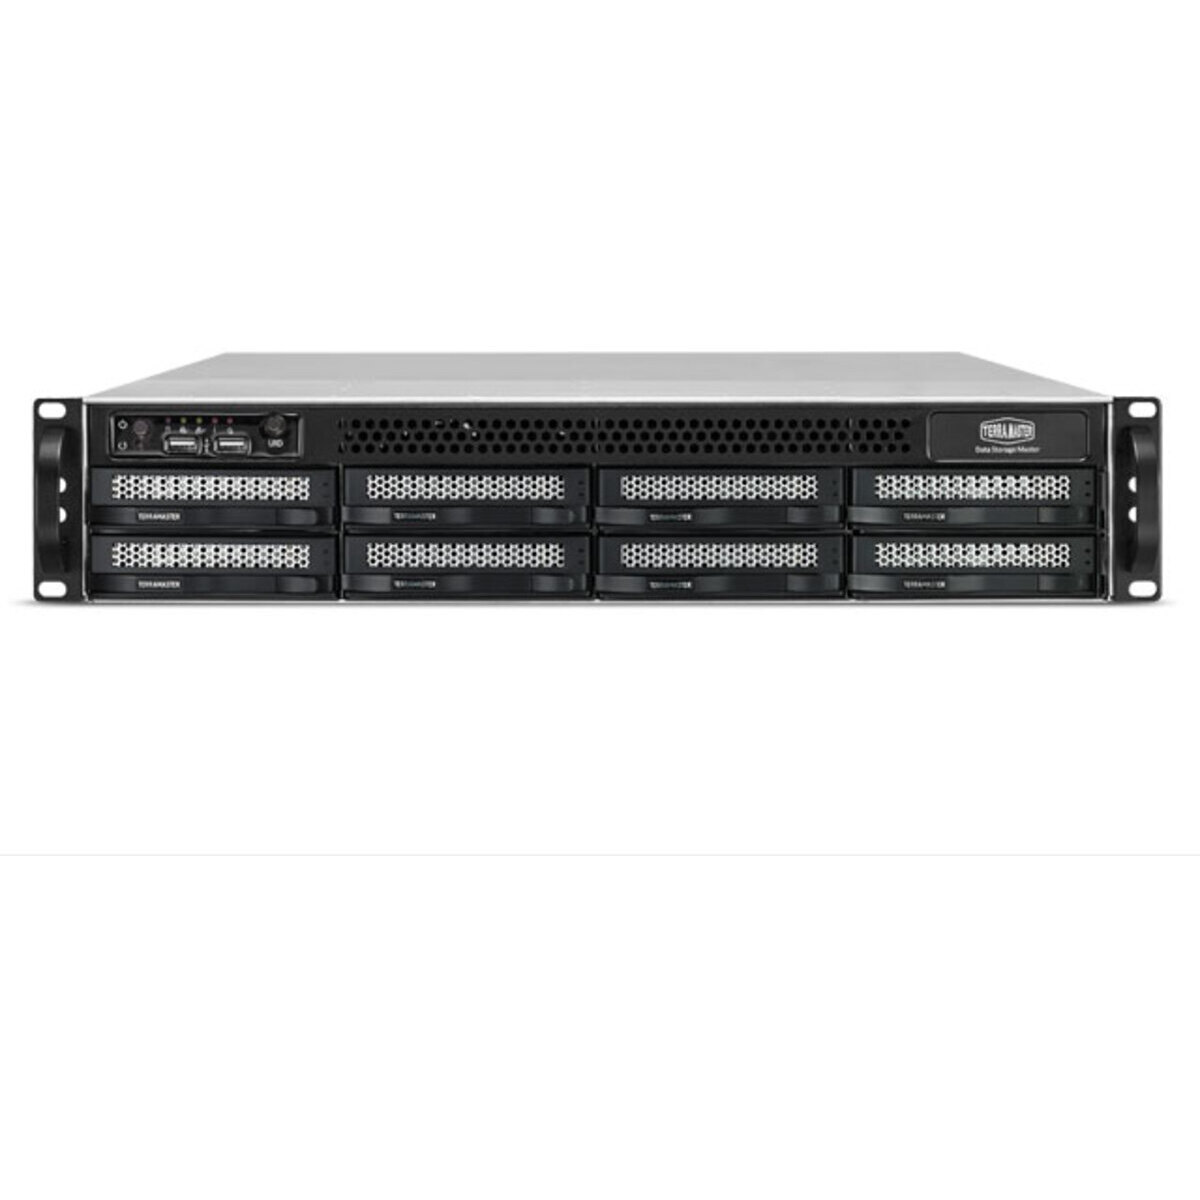 TerraMaster U8-722-2224 2.5tb 8-Bay RackMount Large Business / Enterprise NAS - Network Attached Storage Device 5x500gb Western Digital Red SA500 WDS500G1R0A 2.5 560/530MB/s SATA 6Gb/s SSD NAS Class Drives Installed - Burn-In Tested U8-722-2224